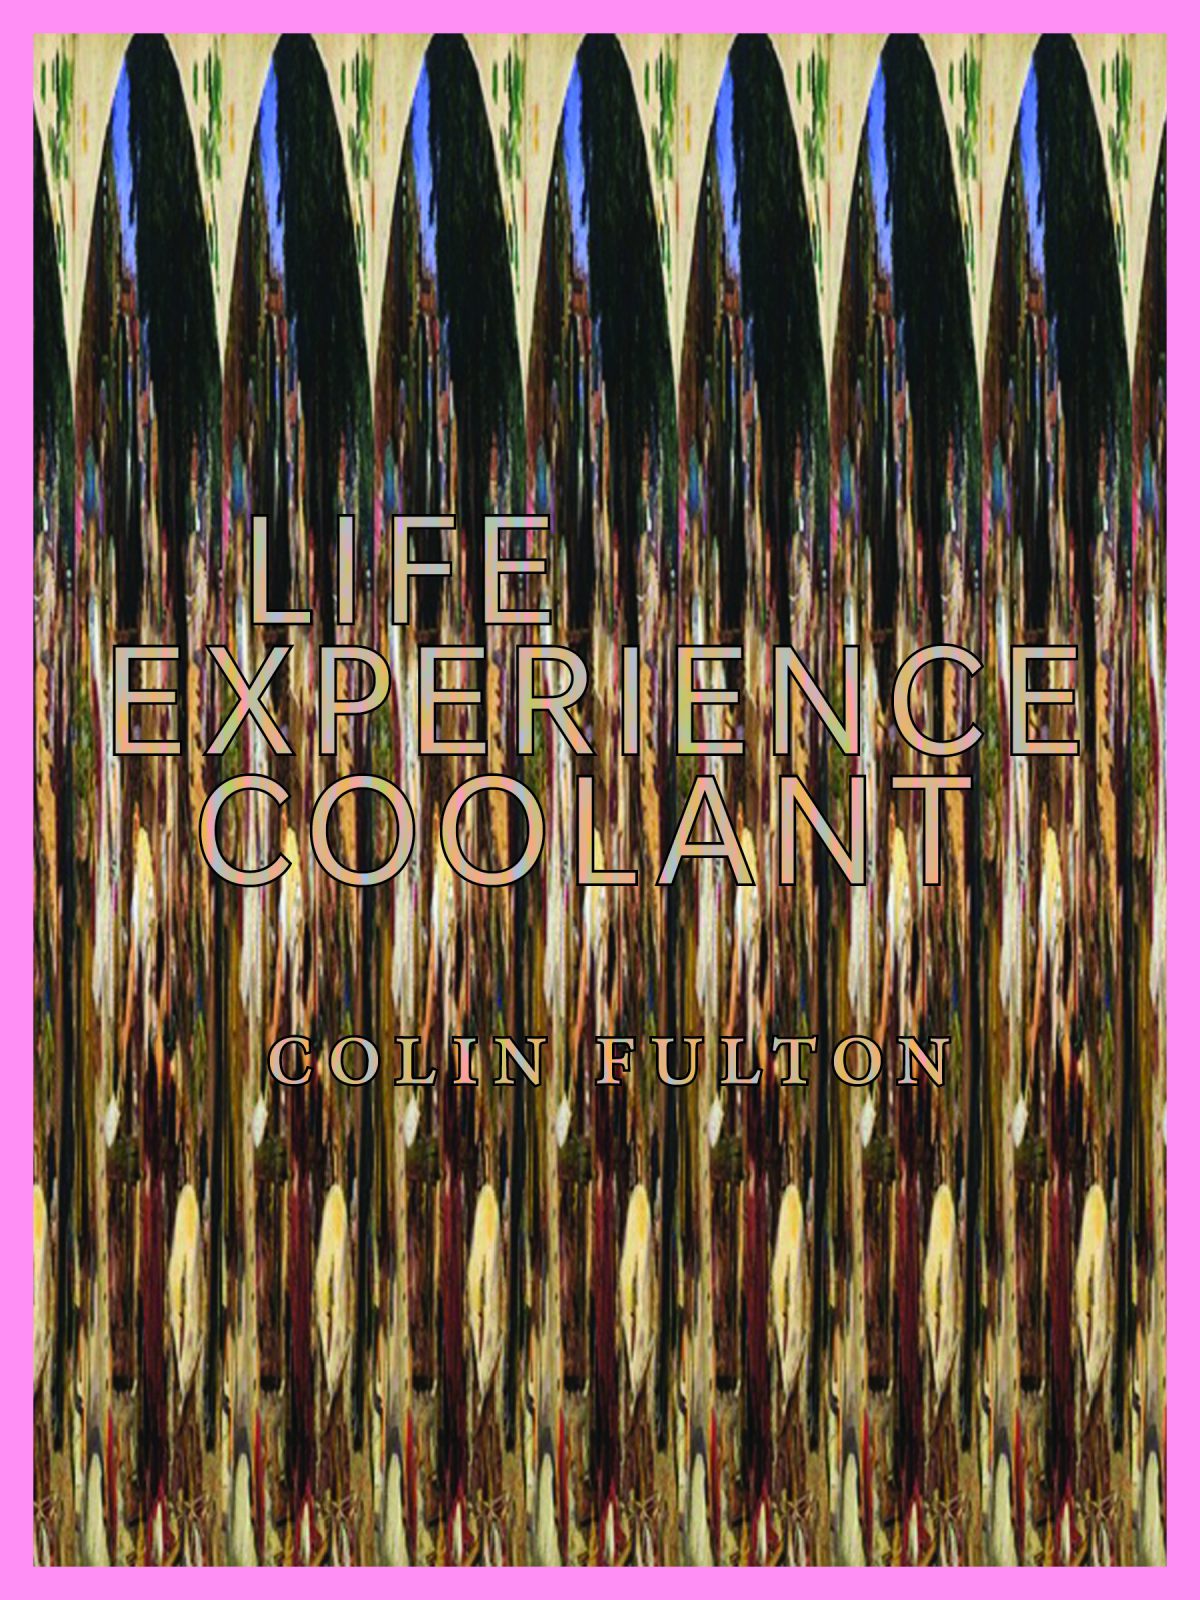 Life Experience Coolant, by Colin Fulton